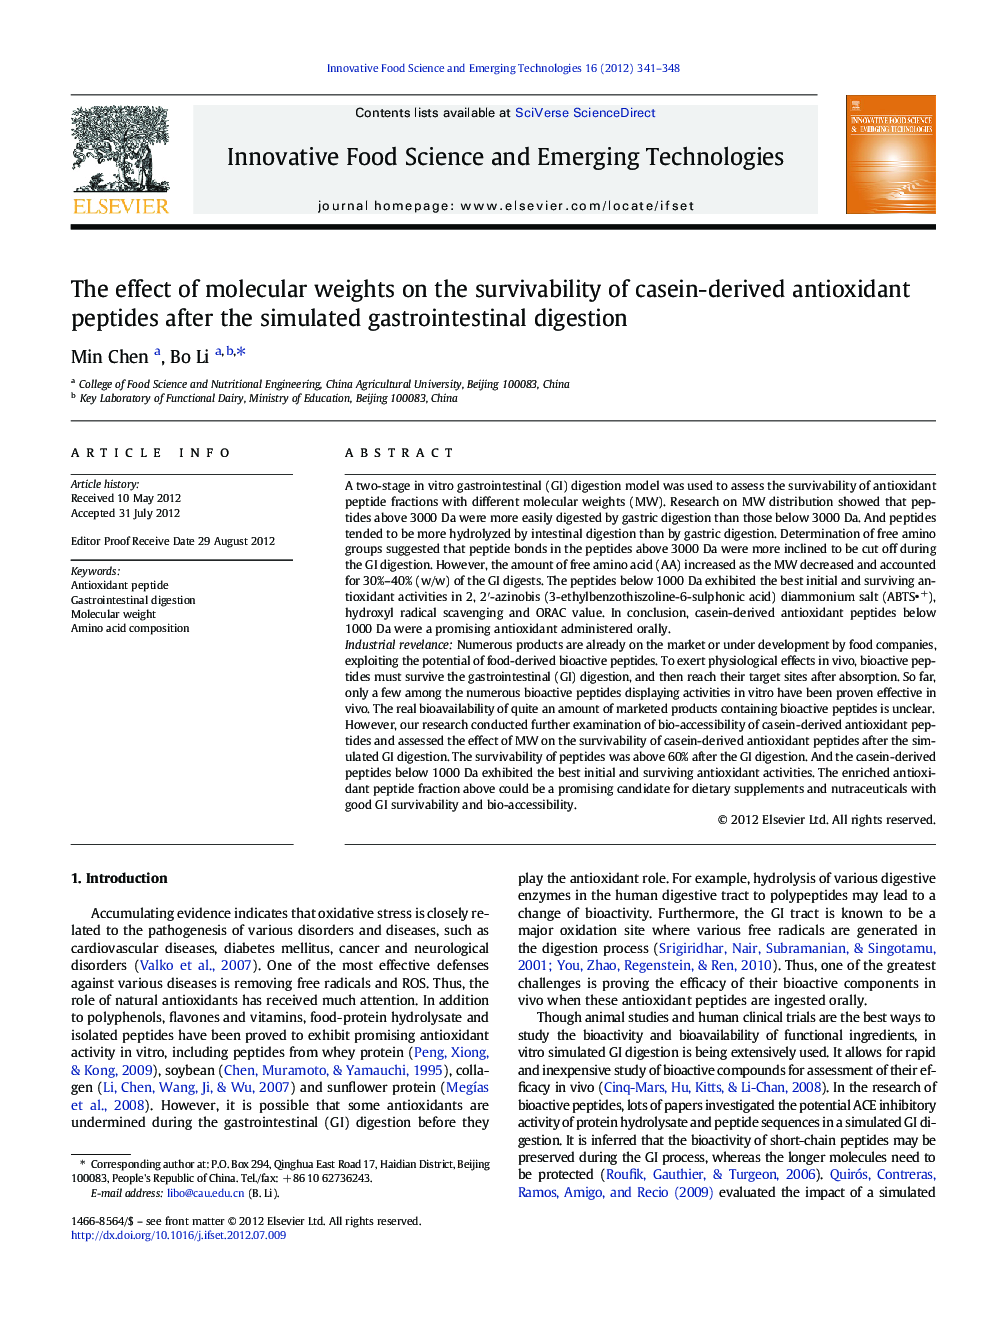 The effect of molecular weights on the survivability of casein-derived antioxidant peptides after the simulated gastrointestinal digestion